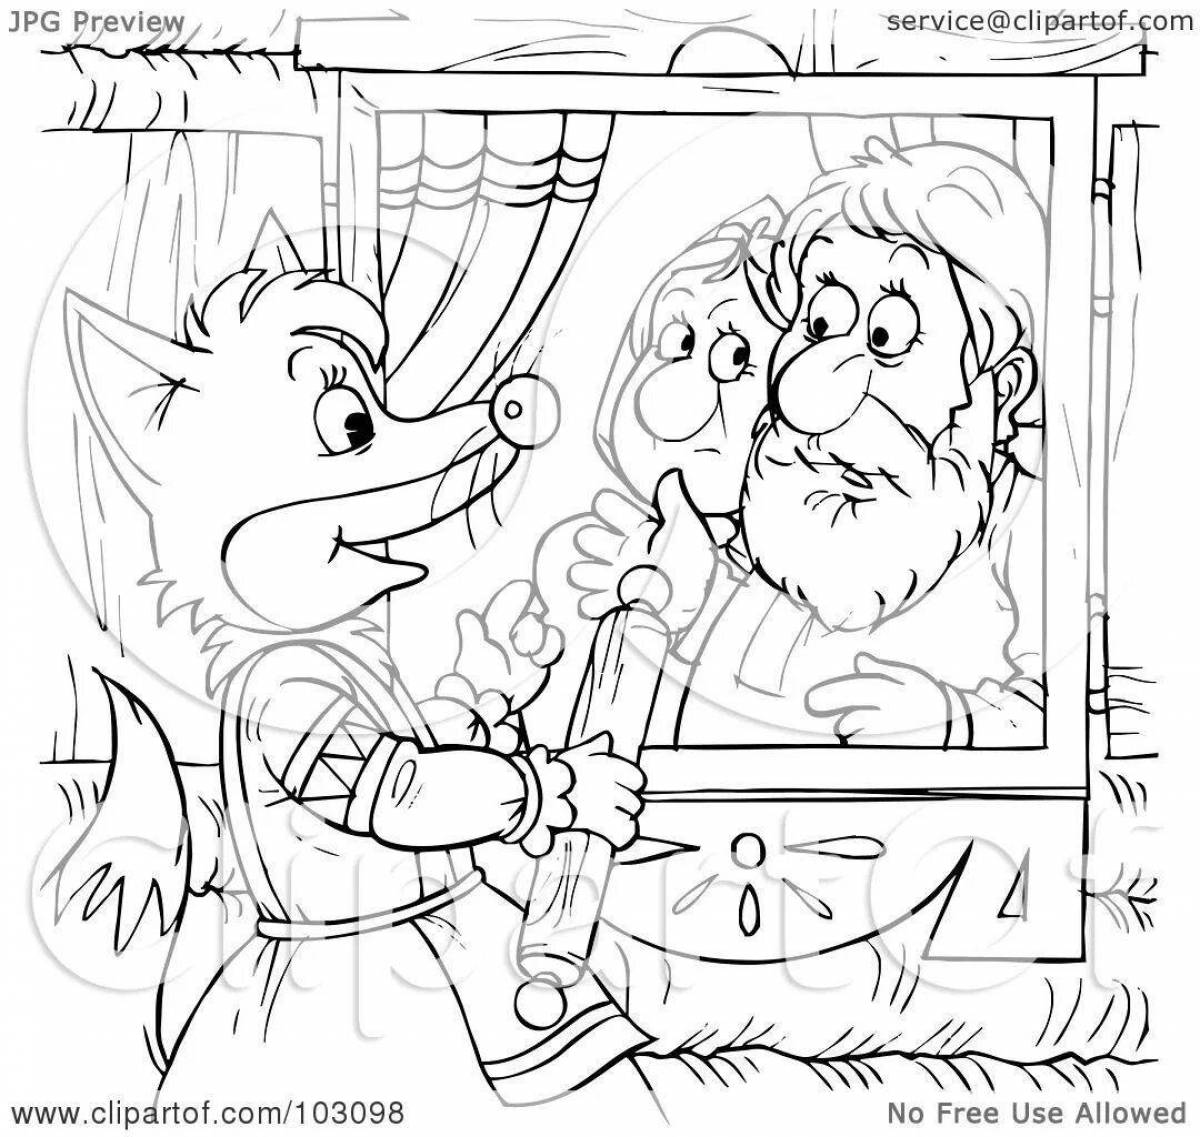 Charming coloring fairytale fox with a rolling pin